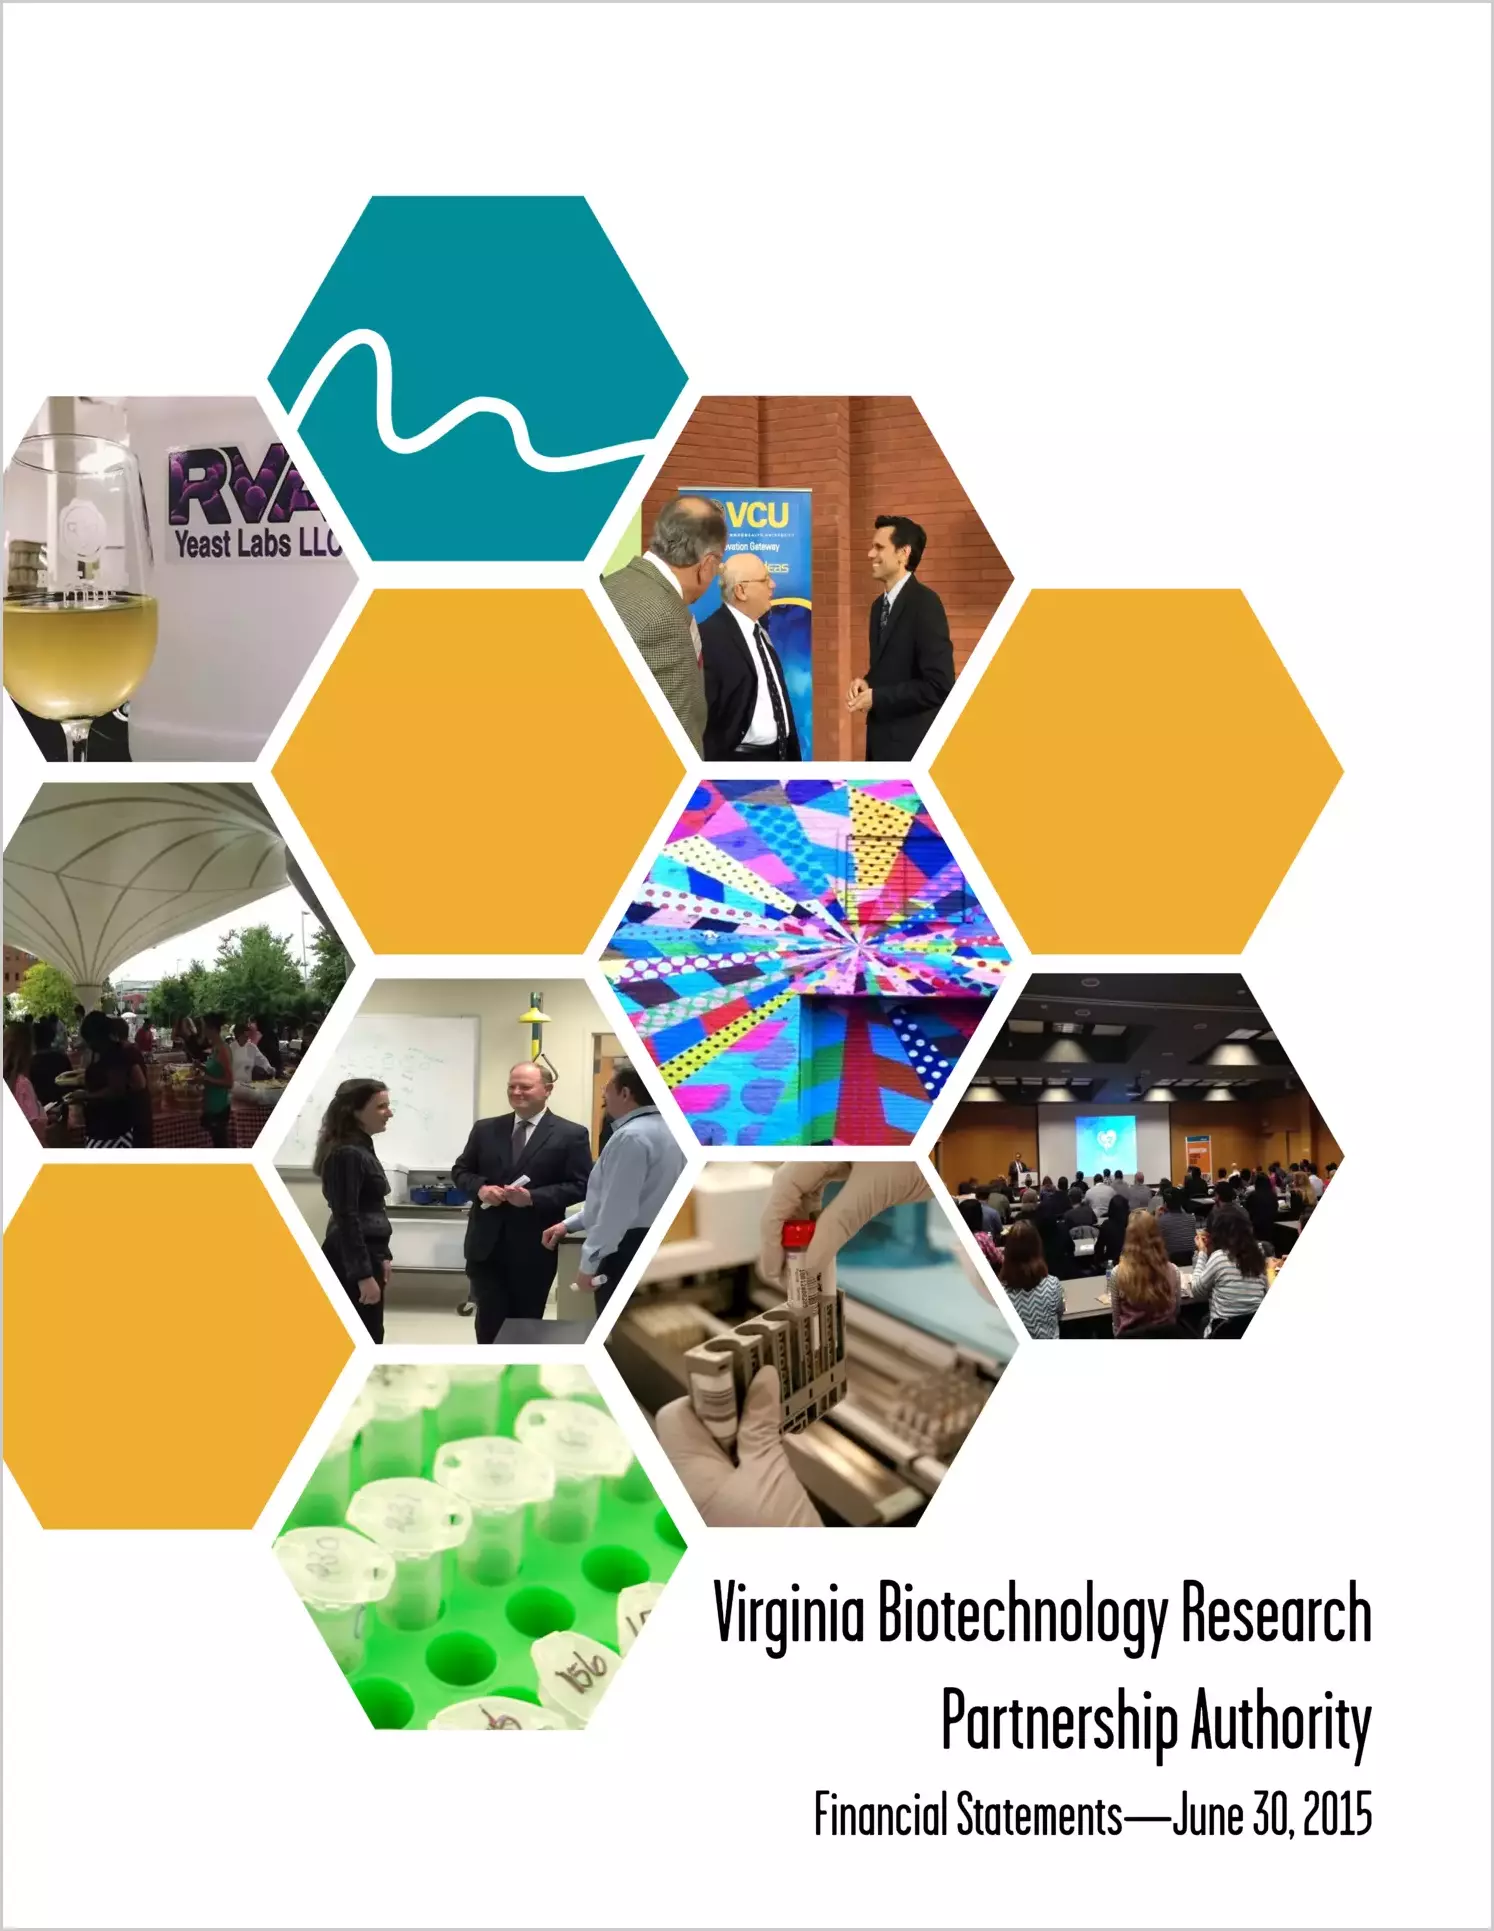 Virginia Biotechnology Research Partnership Authority Financial Statements for the year ended June 30, 2015